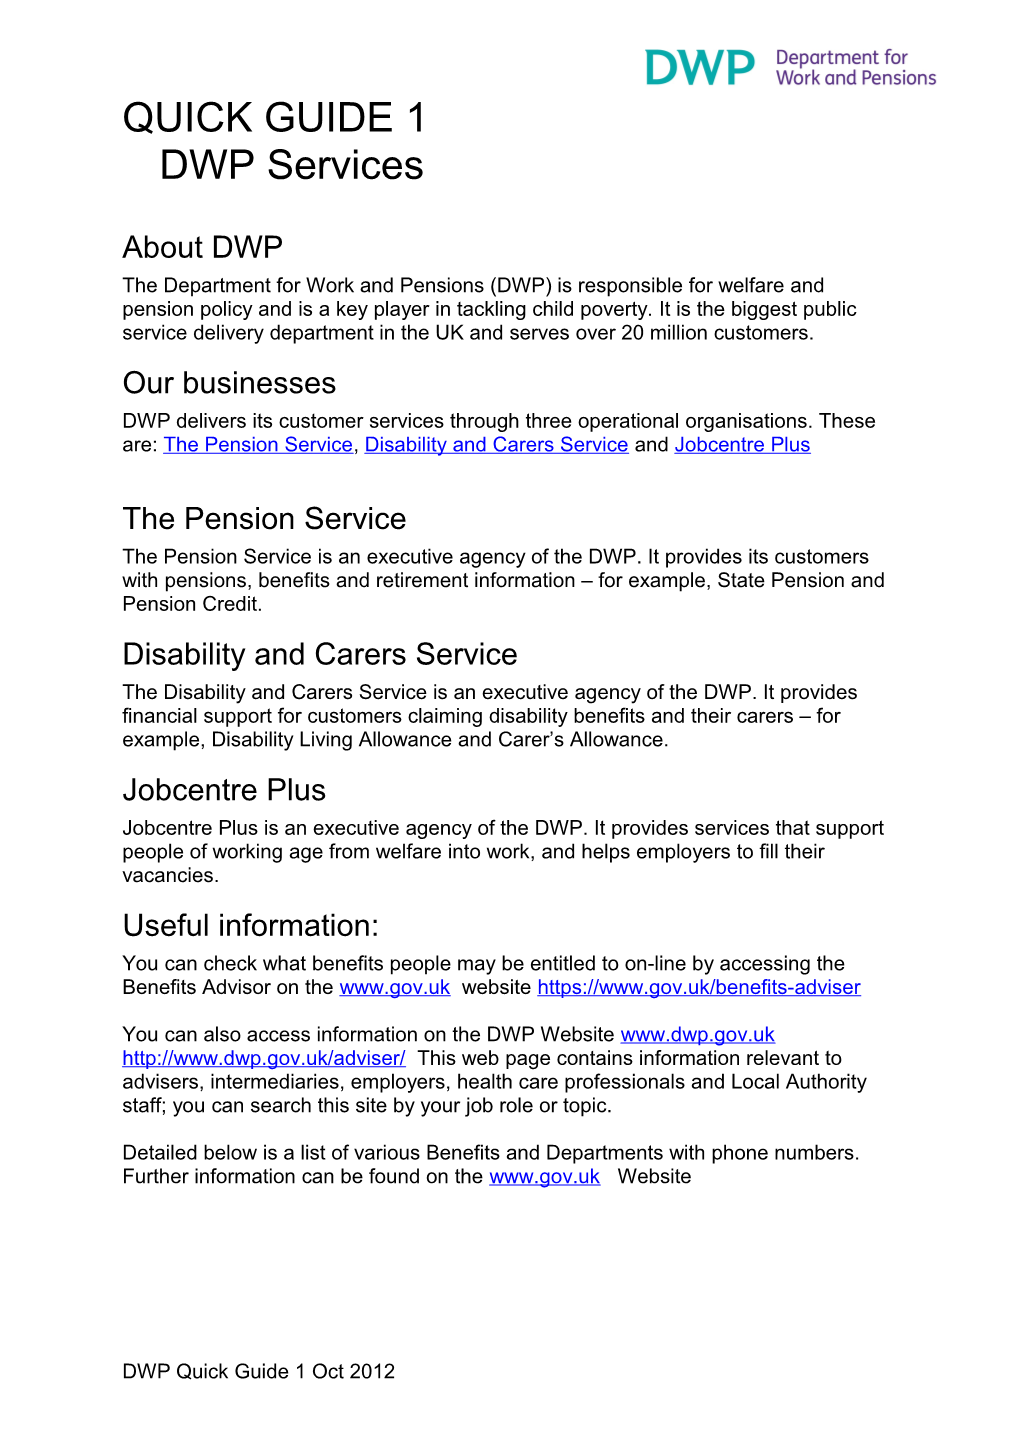 Access to DWP Services